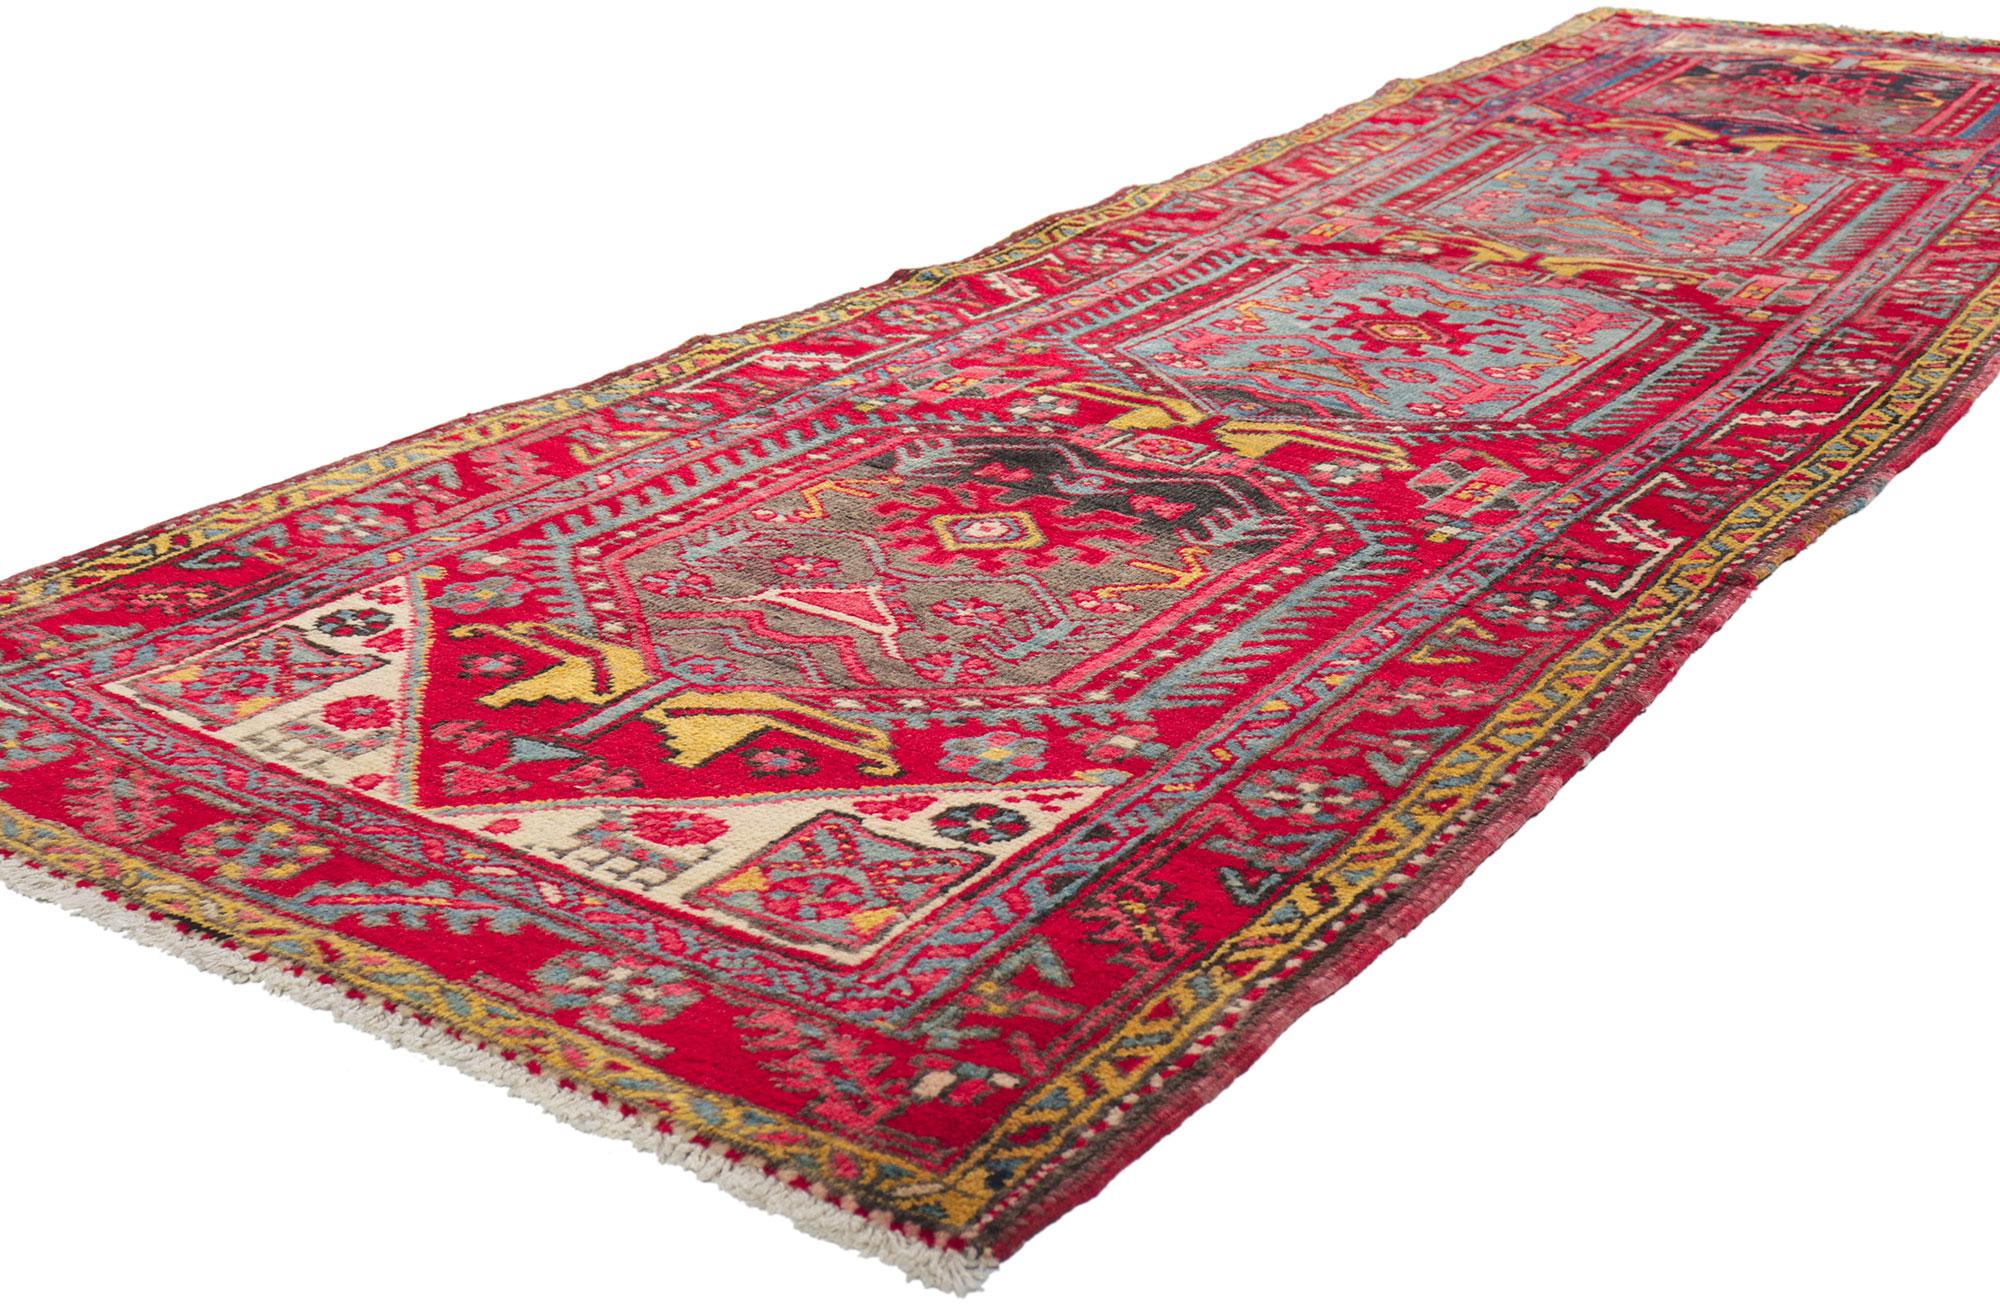 61223 Antique Persian Heriz Runner, 03'00 x 10'05.
Full of tiny details and nomadic charm, this hand knotted wool antique Persian Heriz runner is a captivating vision of woven beauty. The eye-catching tribal design and energetic colorway woven into